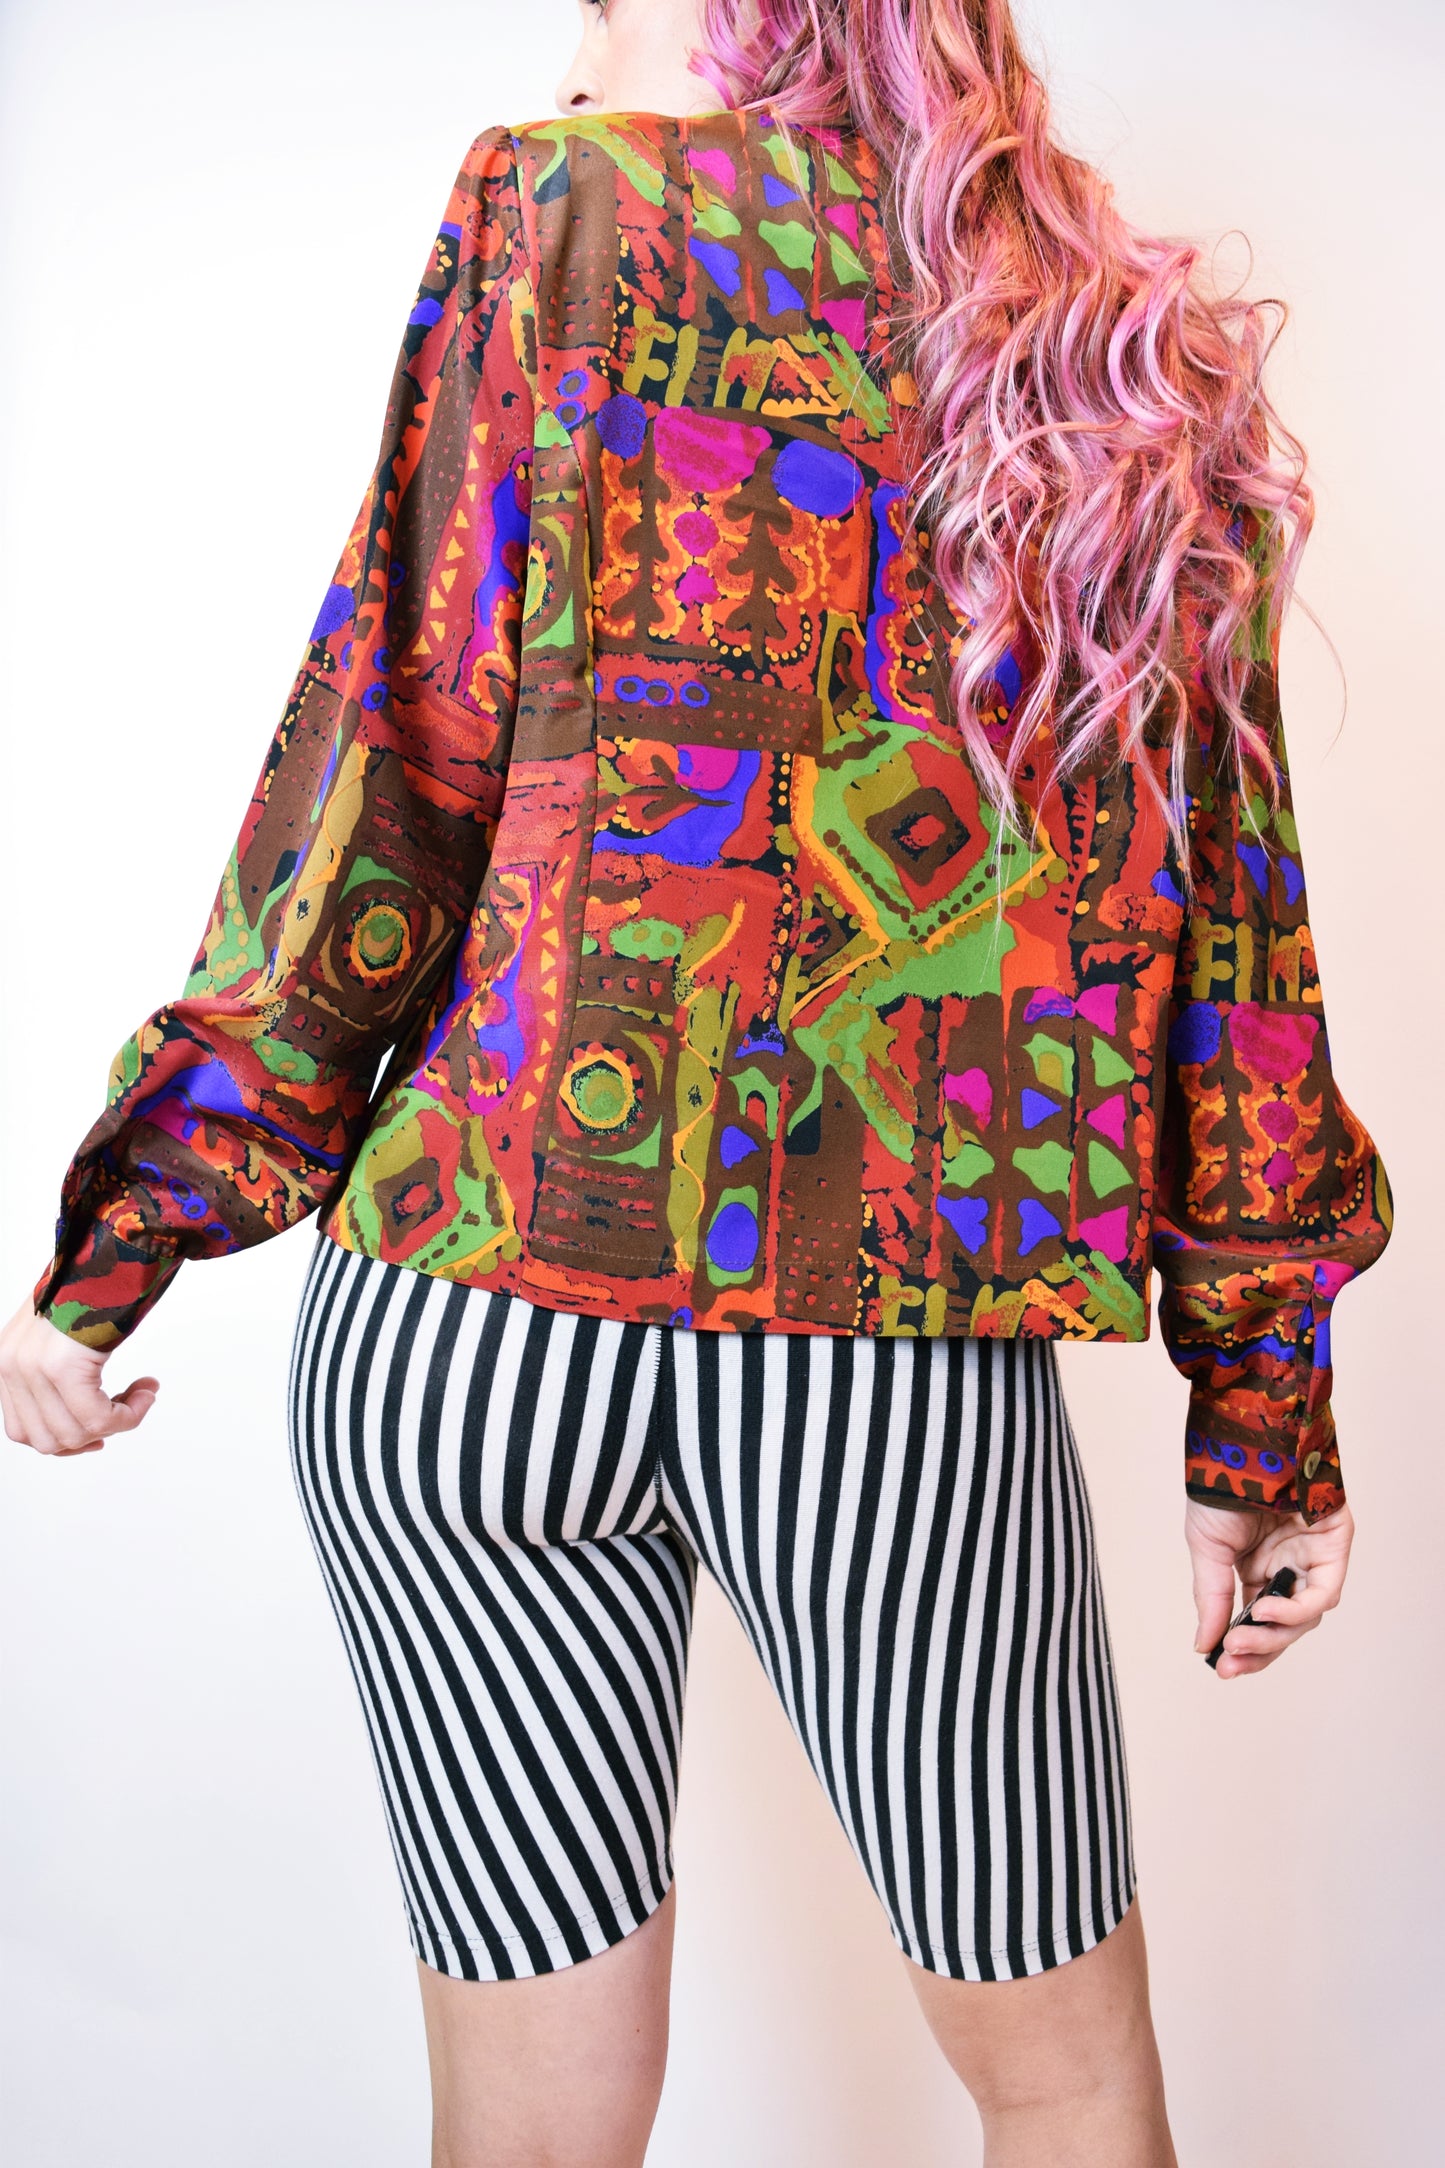 90s ABSTRACT COLORFUL BLOUSE - MEDIUM